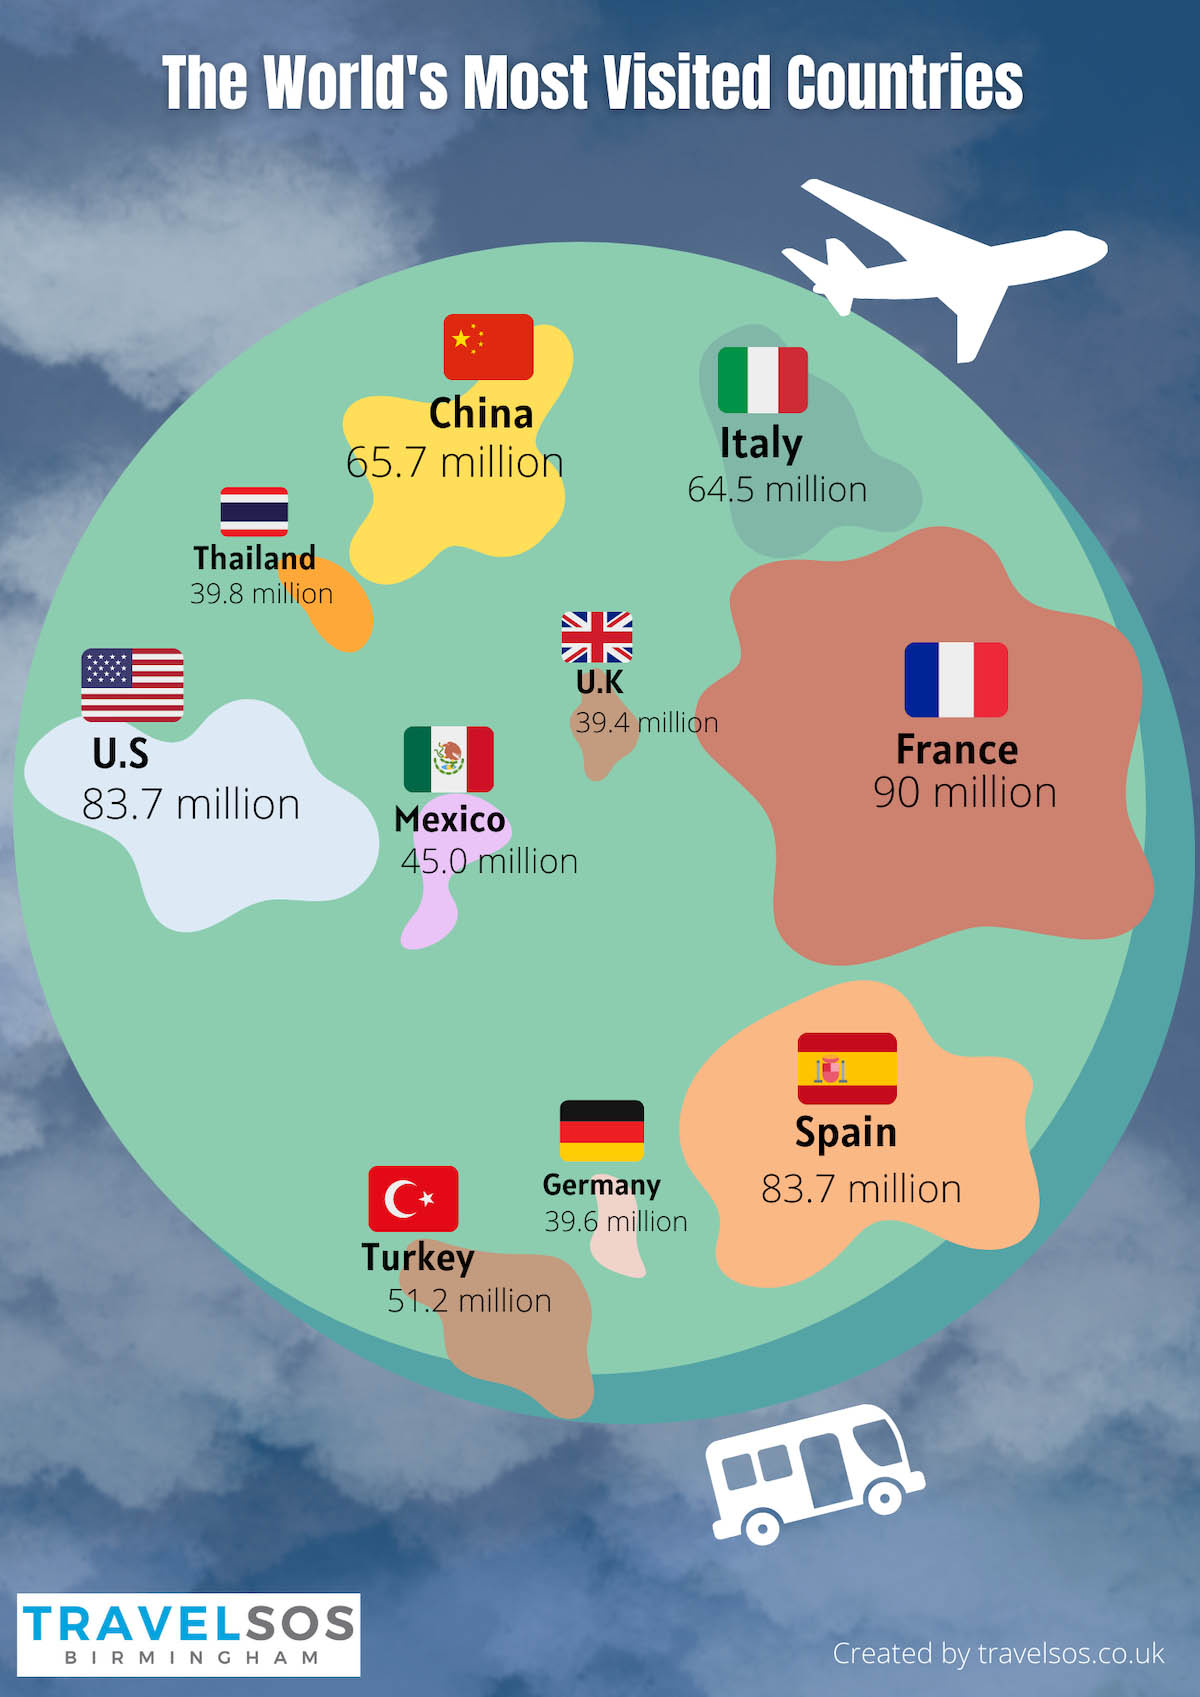 The World's Most Visited Countries